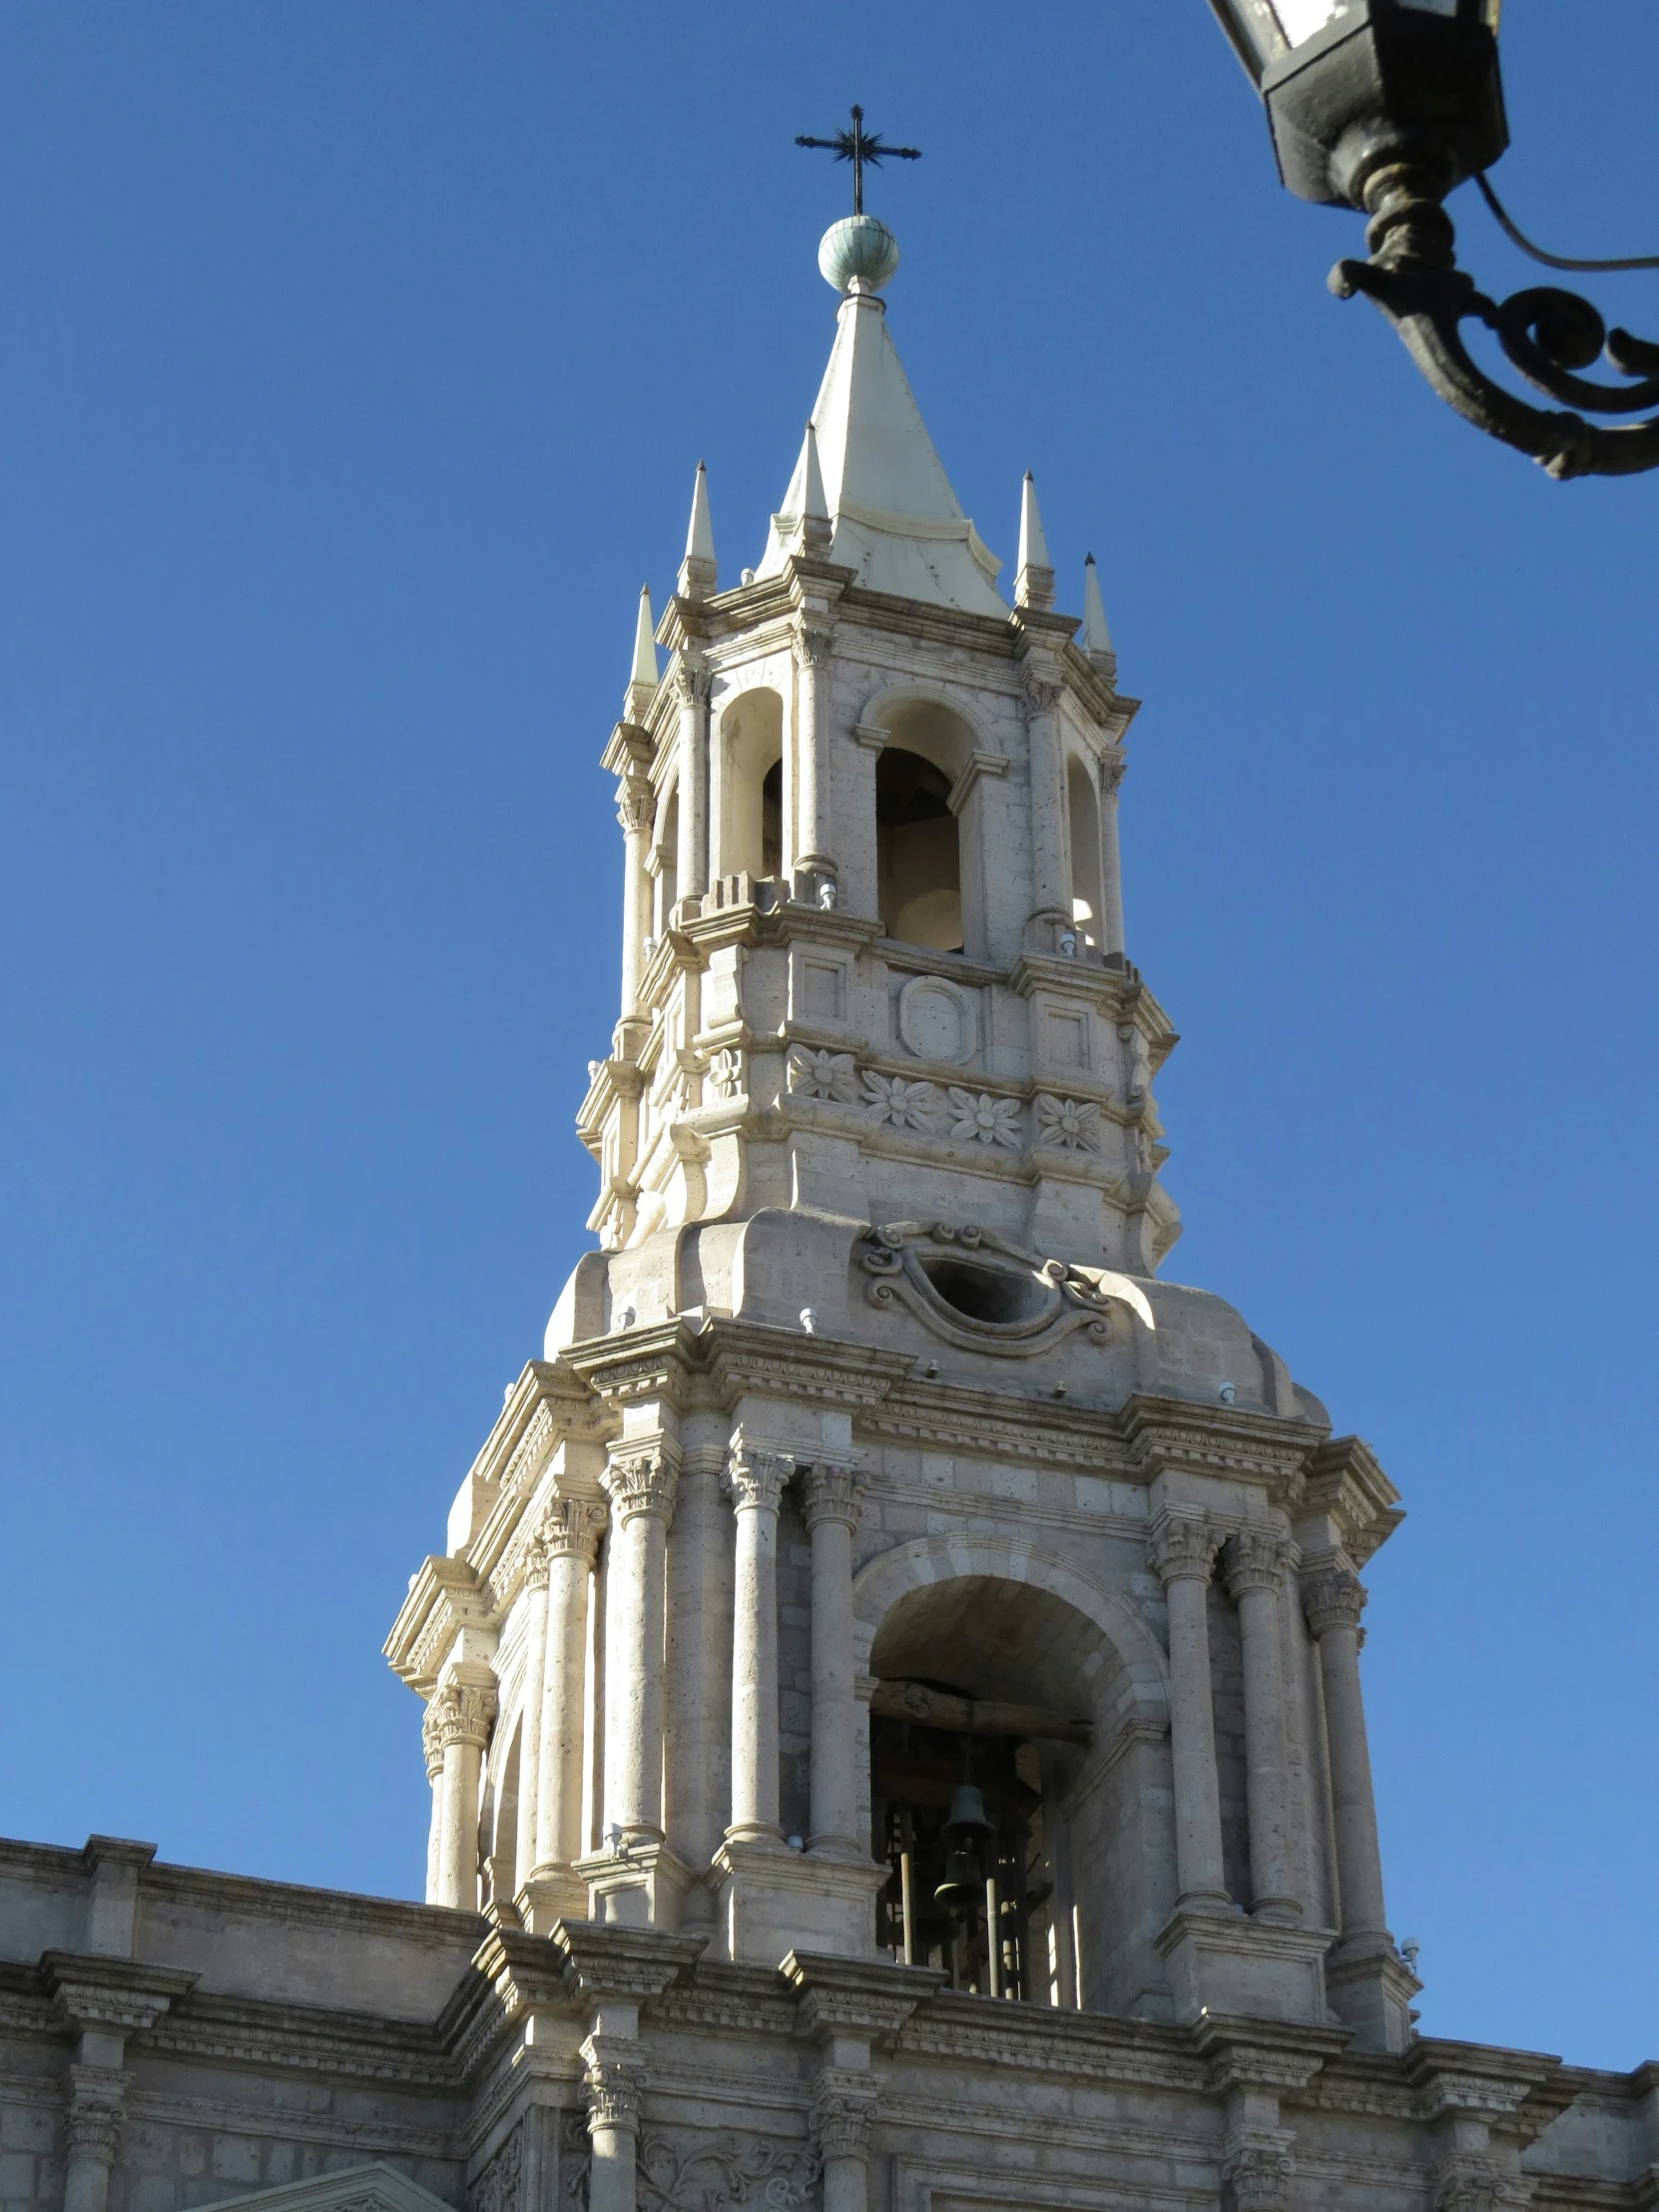 a white clock tower with a steeple and cross at the top